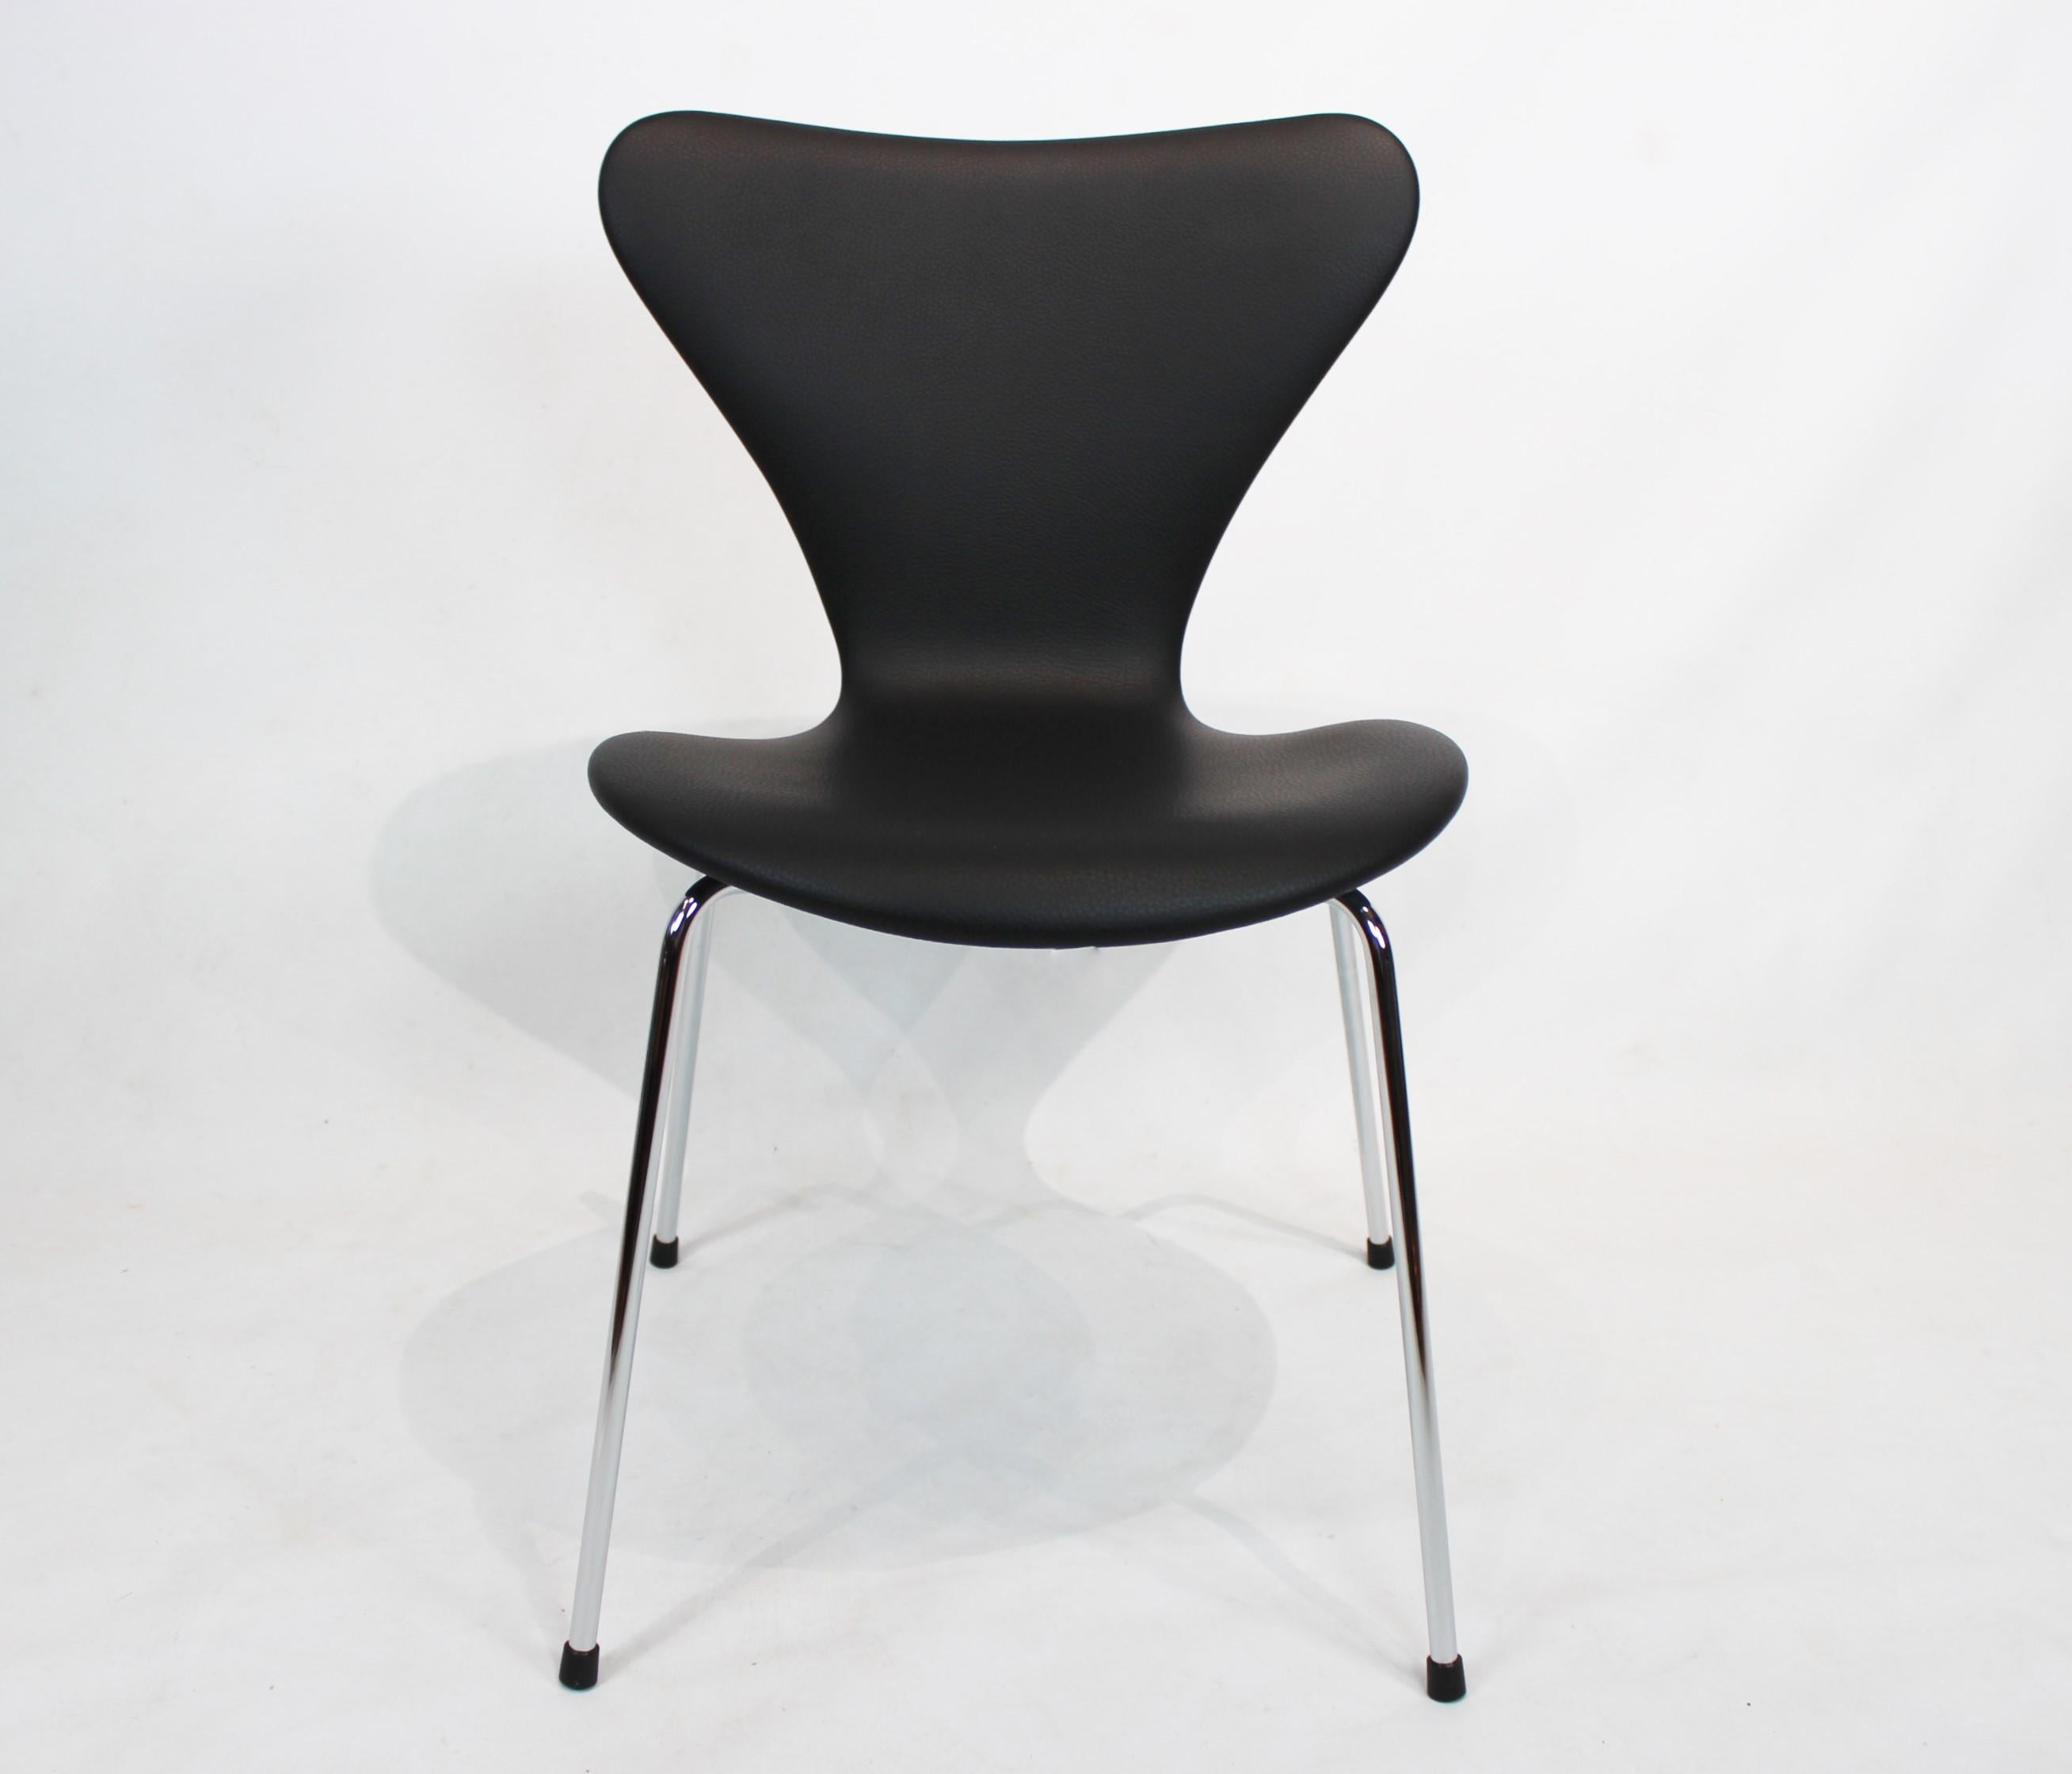 A set of 4 seven chairs, model 3107, designed by Arne Jacobsen and manufactured by Fritz Hansen. The chairs are newly upholstered with black classic leather and are in great used condition.